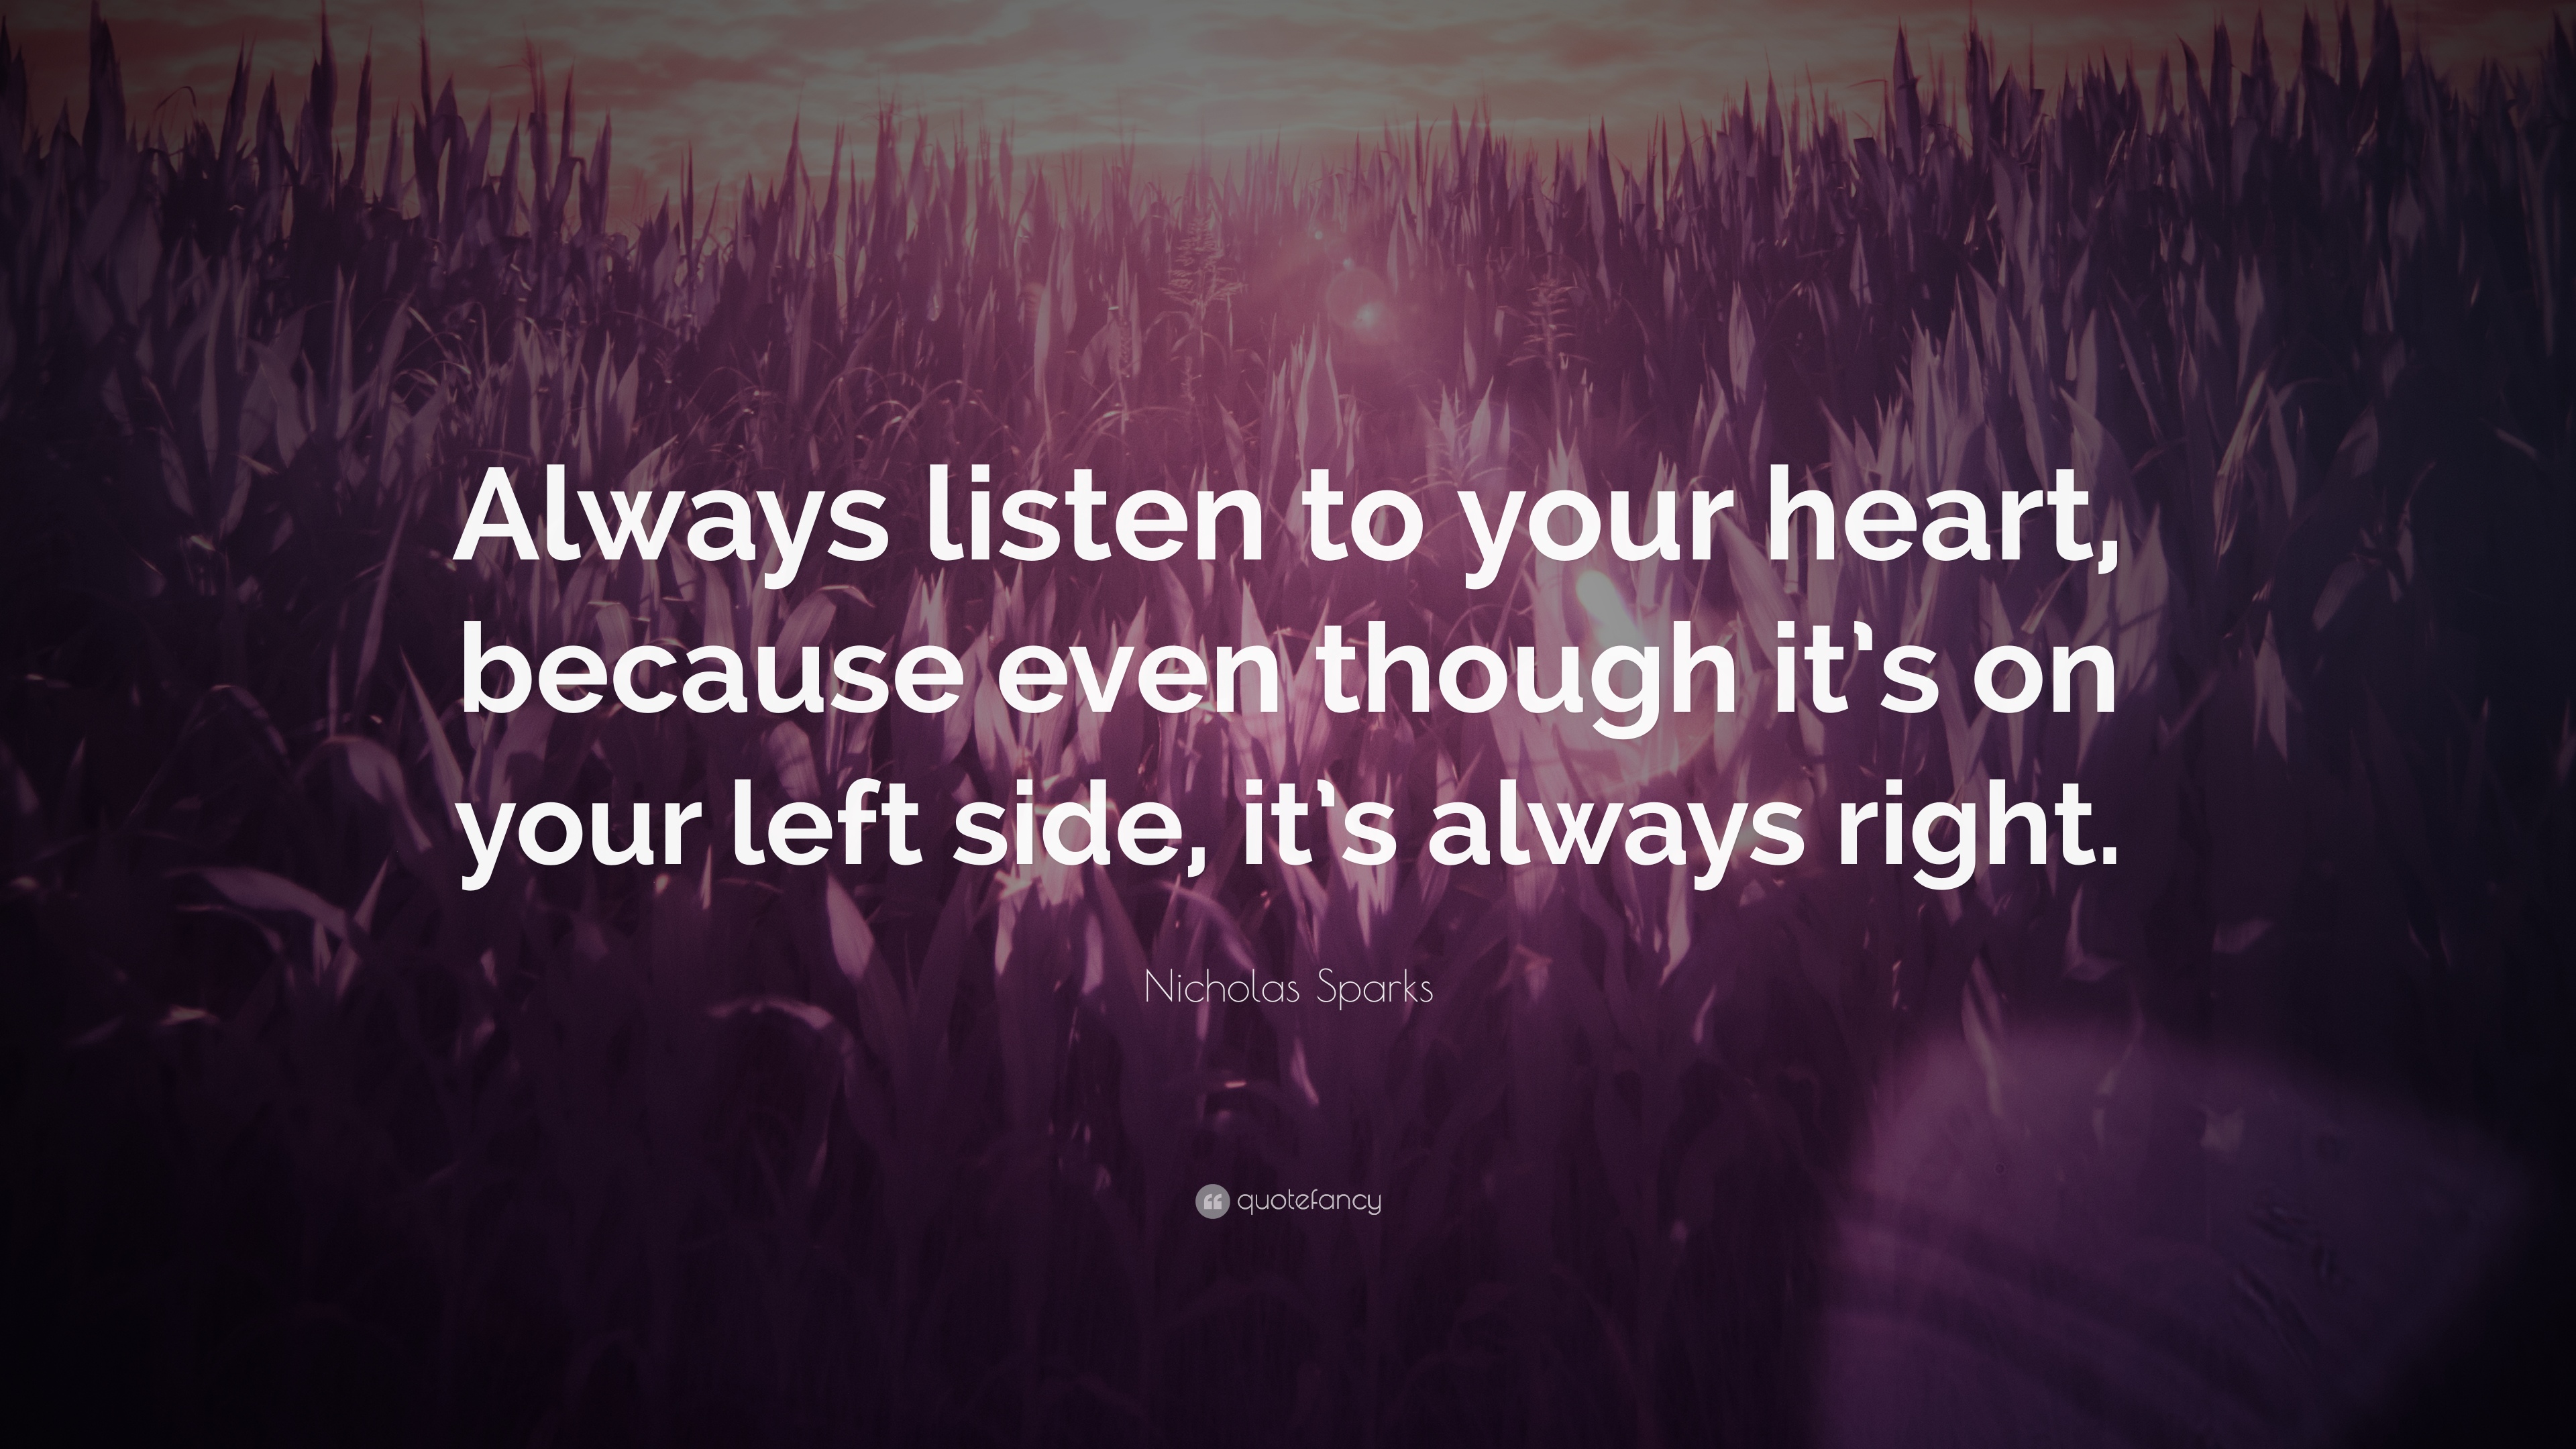 Nicholas Sparks Quote: “Always listen to your heart, because even